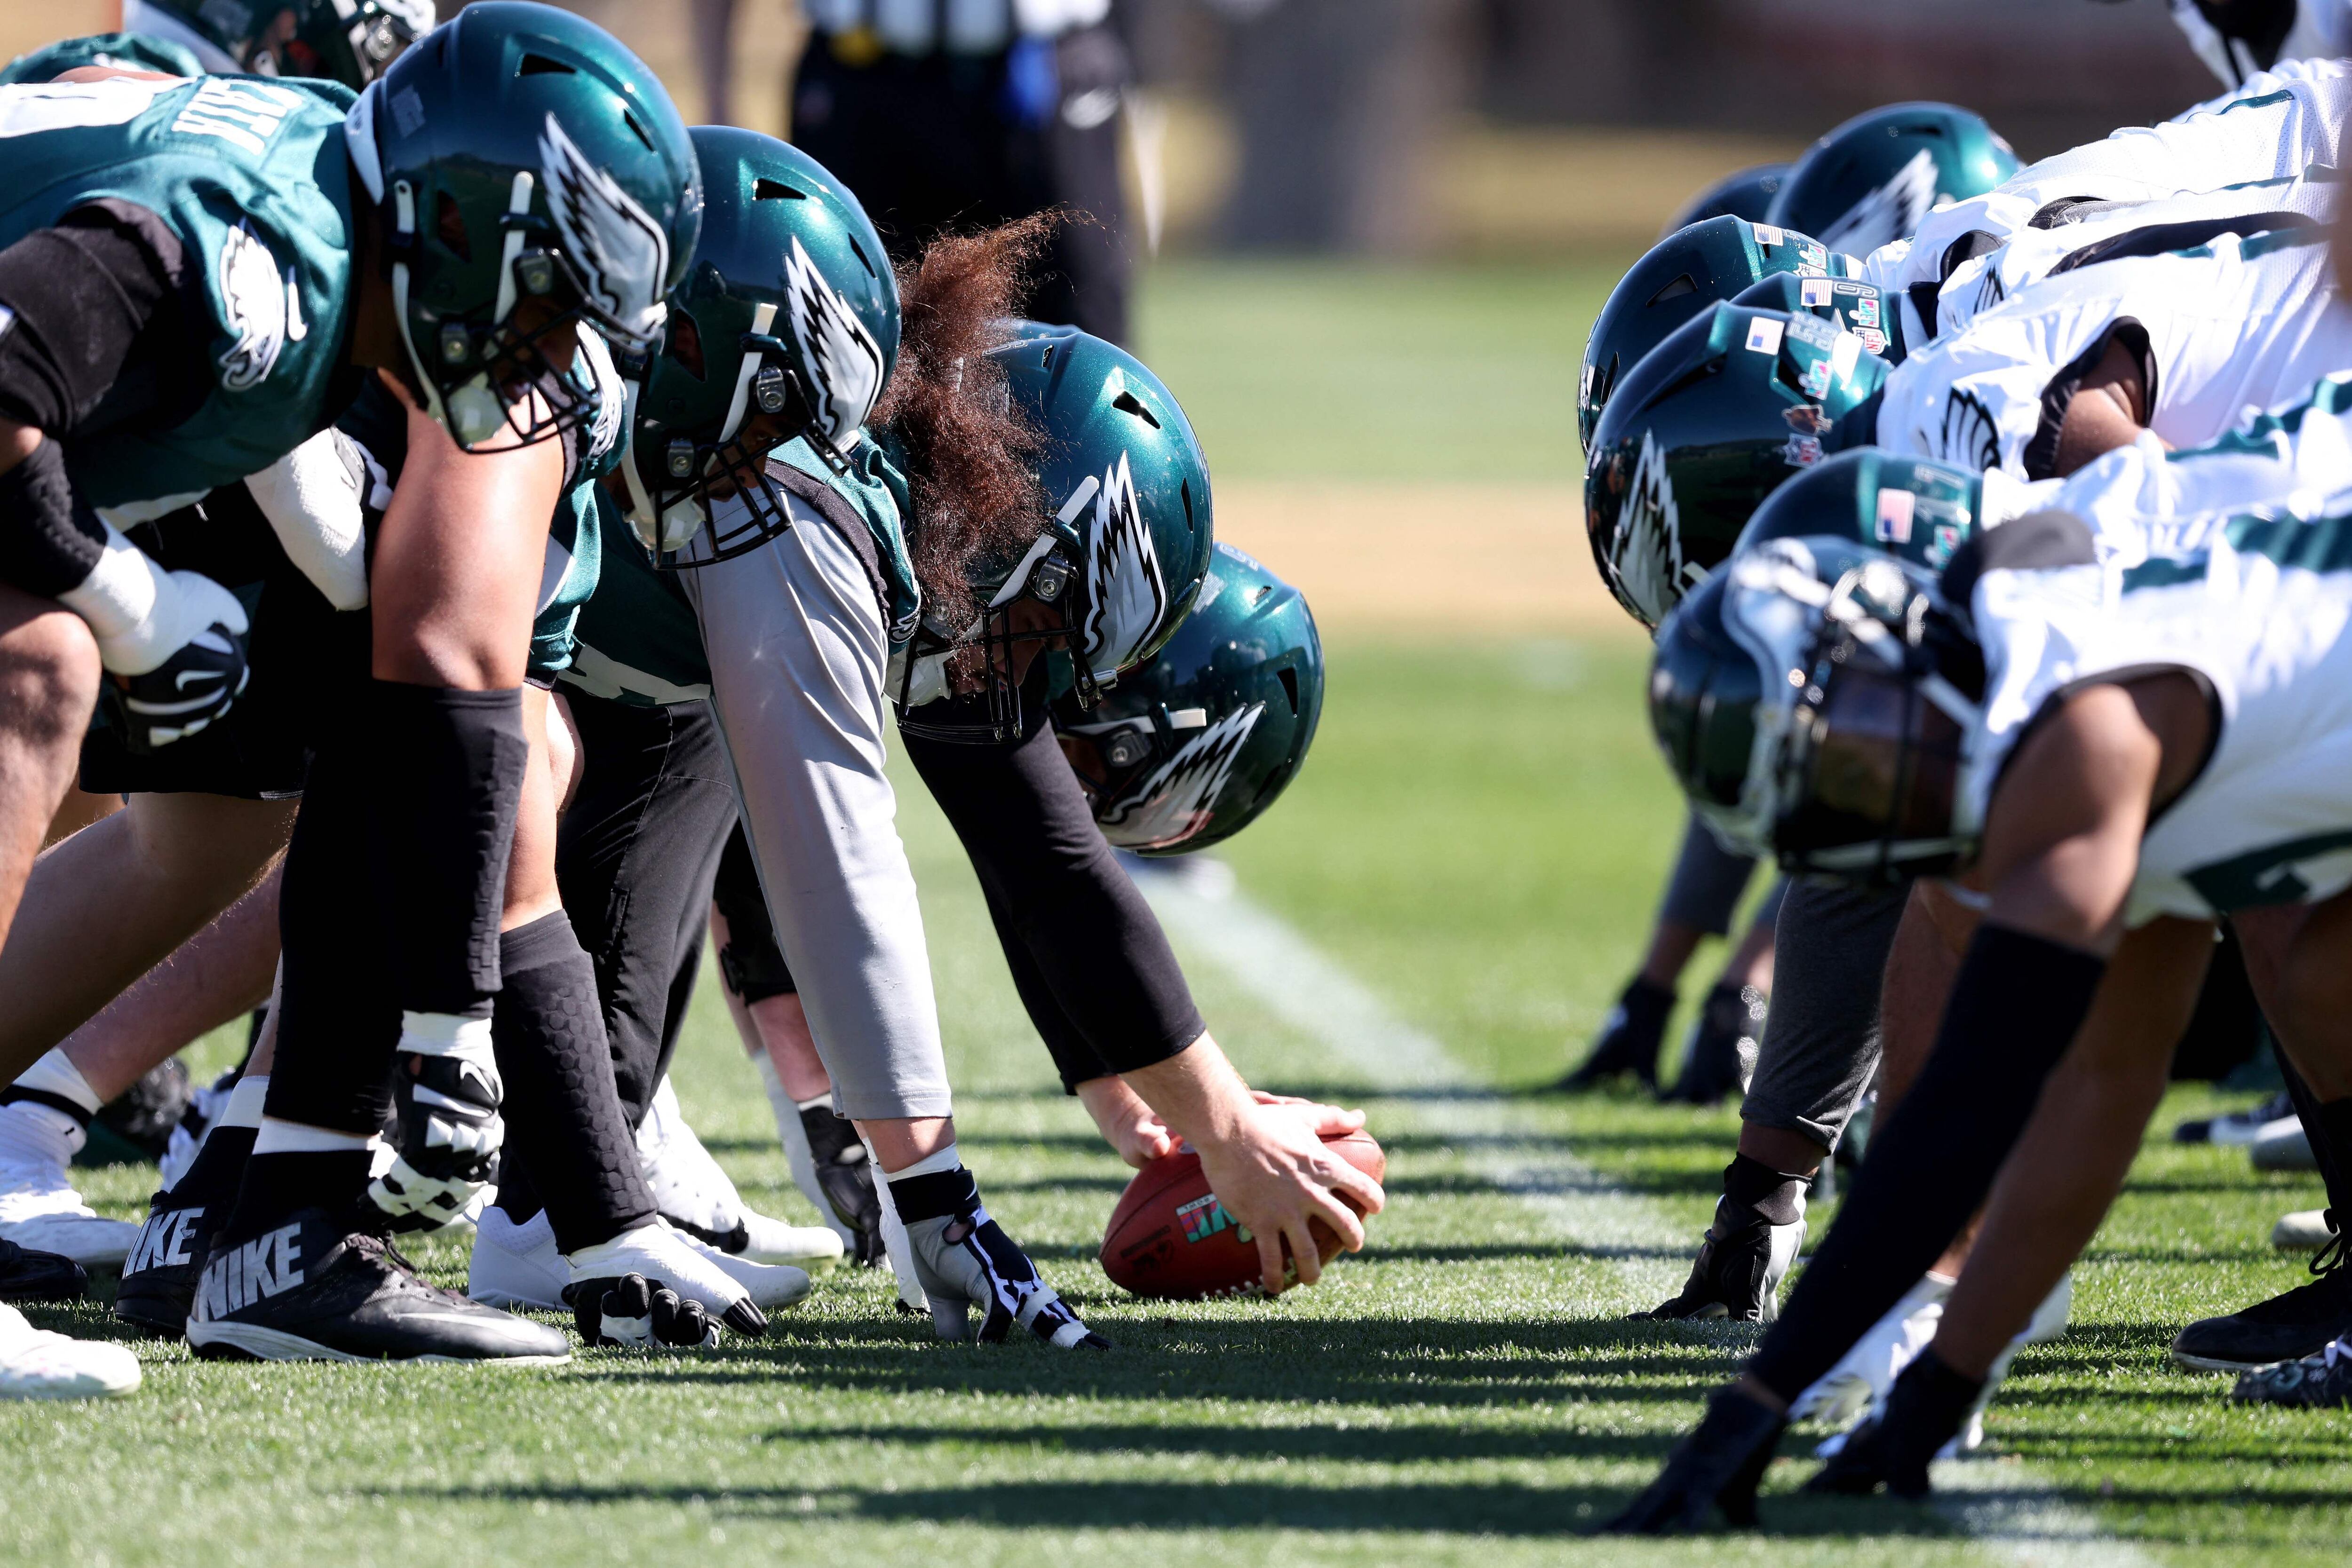 TEMPE, ARIZONA - FEBRUARY 09: Philadelphia Eagles line up in a practice session prior to Super Bowl LVII at Arizona Cardinals Training Center on February 09, 2023 in Tempe, Arizona. The Kansas City Chiefs play the Philadelphia Eagles in Super Bowl LVII on February 12, 2023 at State Farm Stadium.   Rob Carr/Getty Images/AFP (Photo by Rob Carr / GETTY IMAGES NORTH AMERICA / Getty Images via AFP)